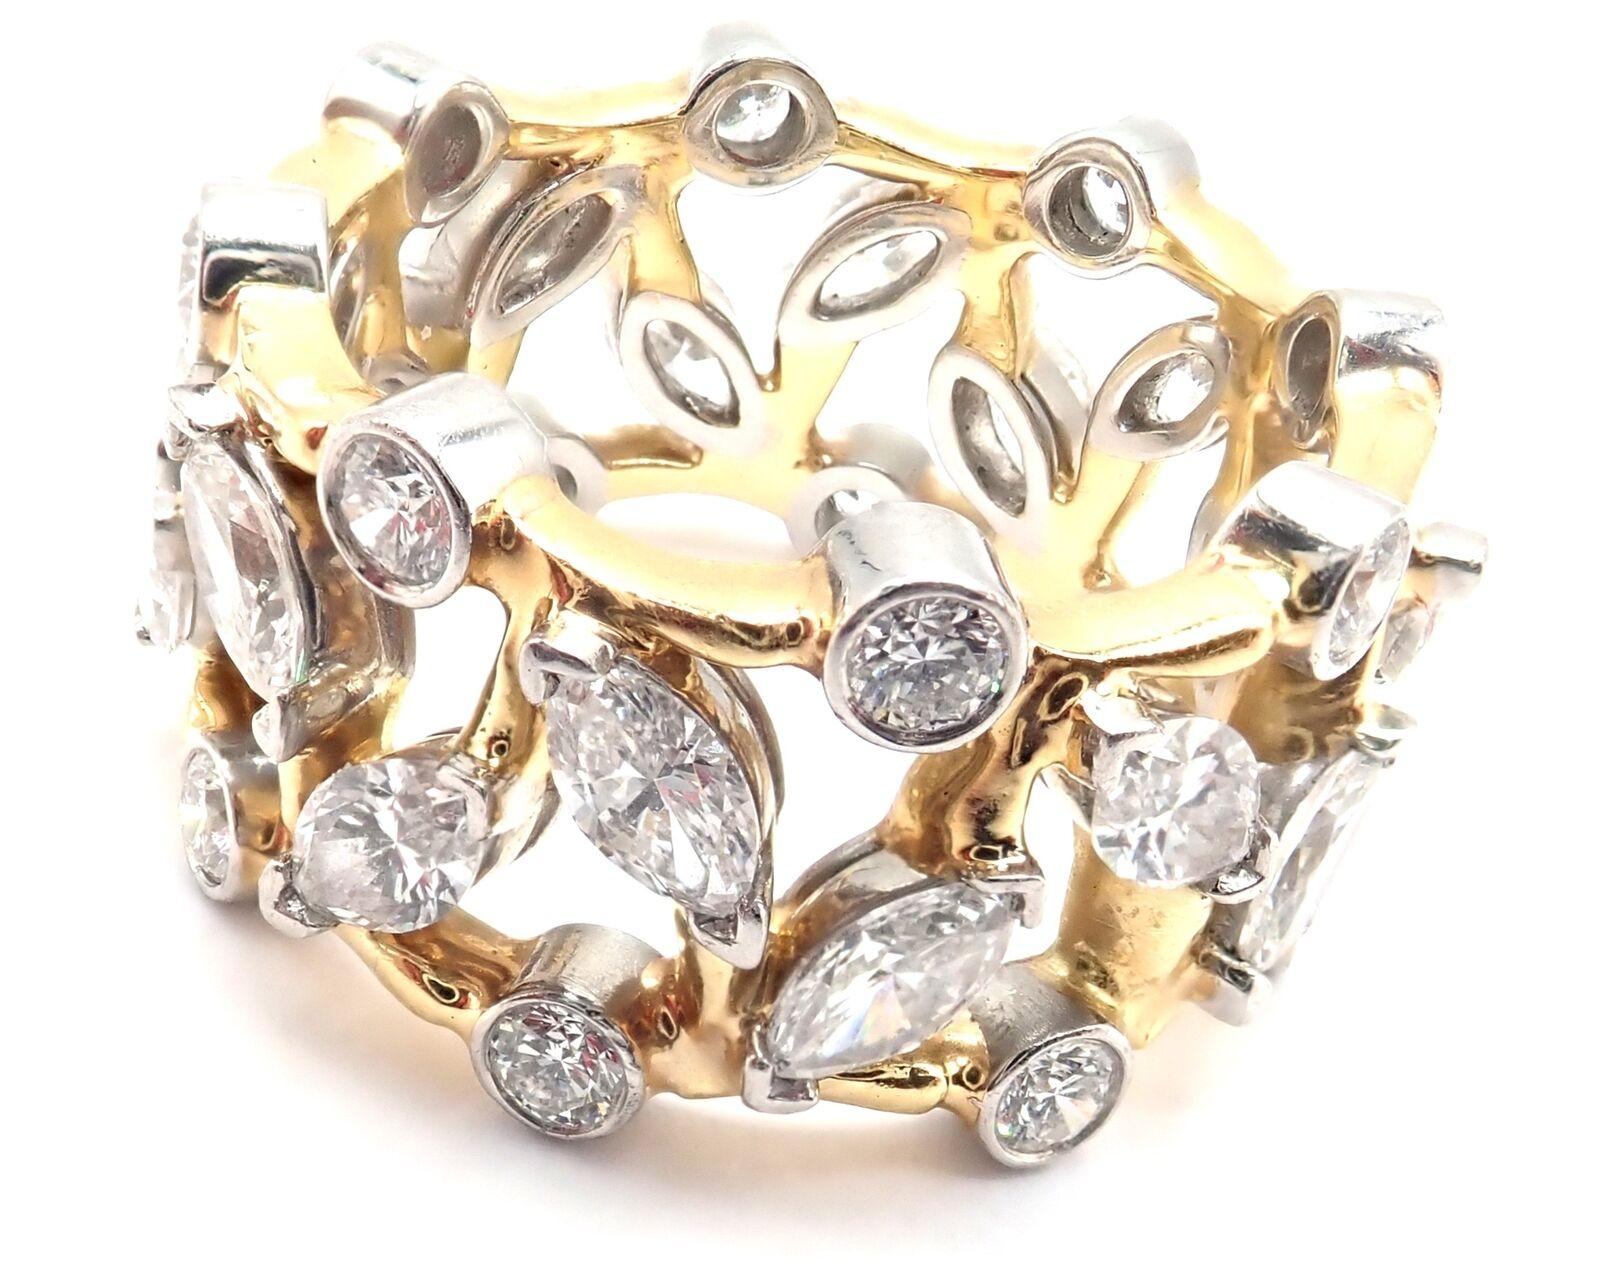 18k Yellow Gold & Platinum Diamond Vigne Jean Schlumberger Band Ring designed for Tiffany & Co. 
With Round brilliant cut diamonds VS1 clarity, E color total weight approximately .65ct
Marquee cut diamonds total weight approximately 2ct
Total